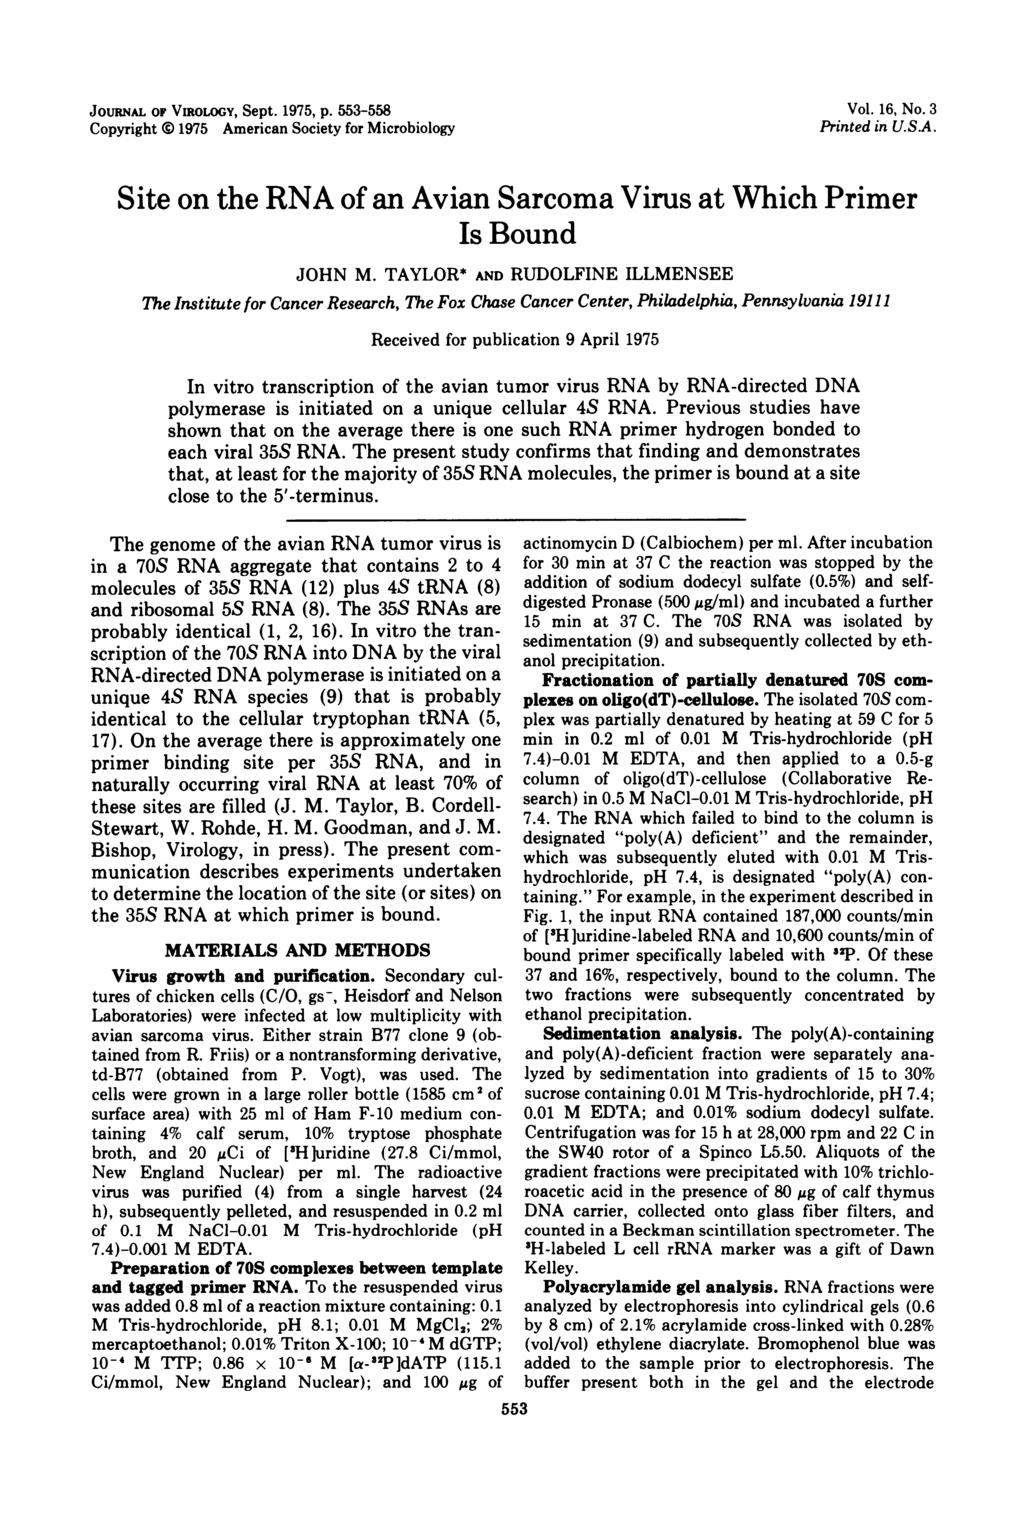 JOURNAL OF VIROLOGY, Sept. 1975, p. 553-558 Copyright 0 1975 American Society for Microbiology Vol. 16, No. 3 Printed in U.SA.